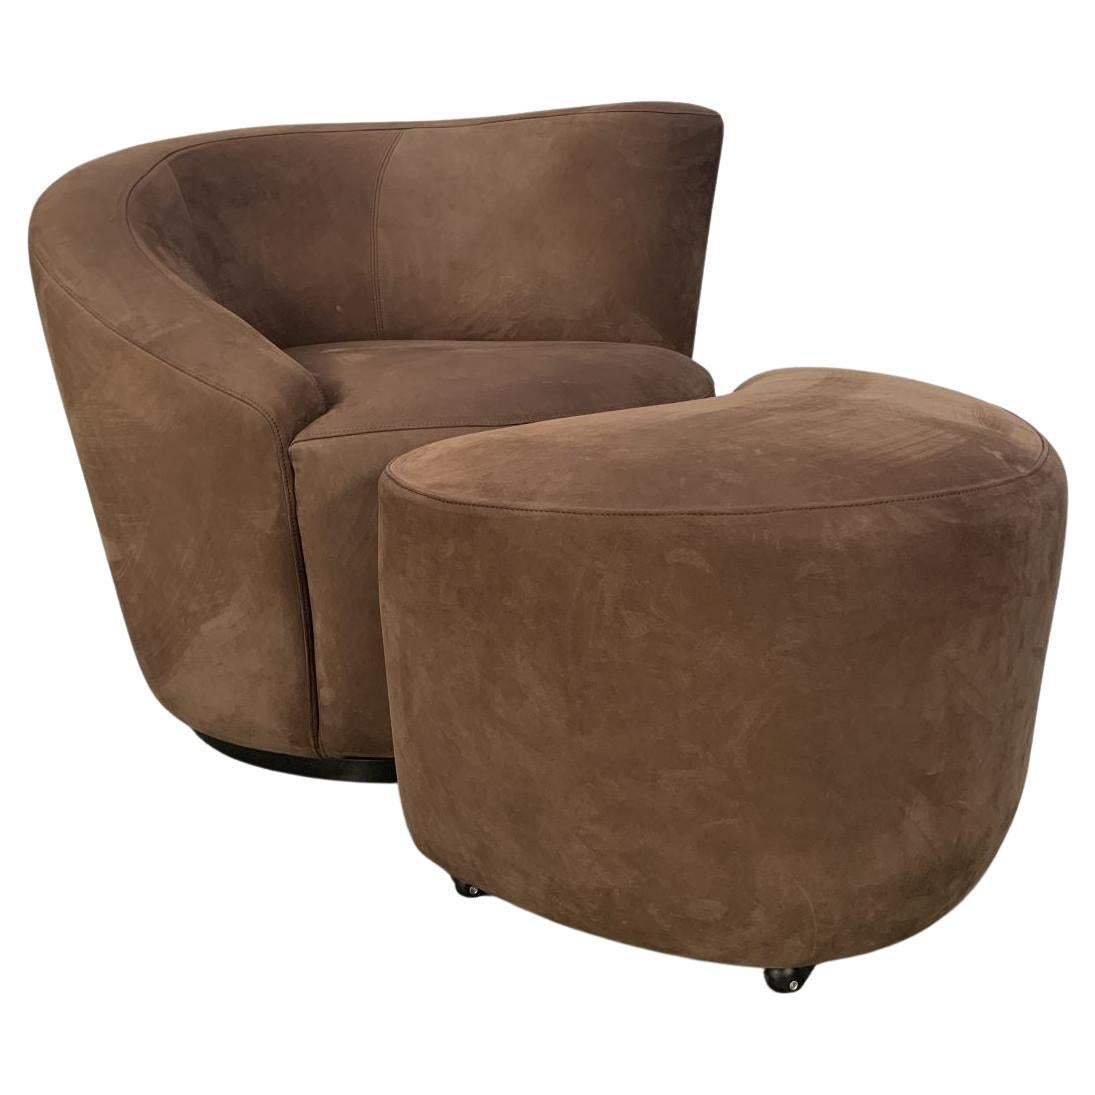 Superb Vladimir Kagan “Nautilus” Corkscrew Armchair and Footstool in Brown Ultra For Sale